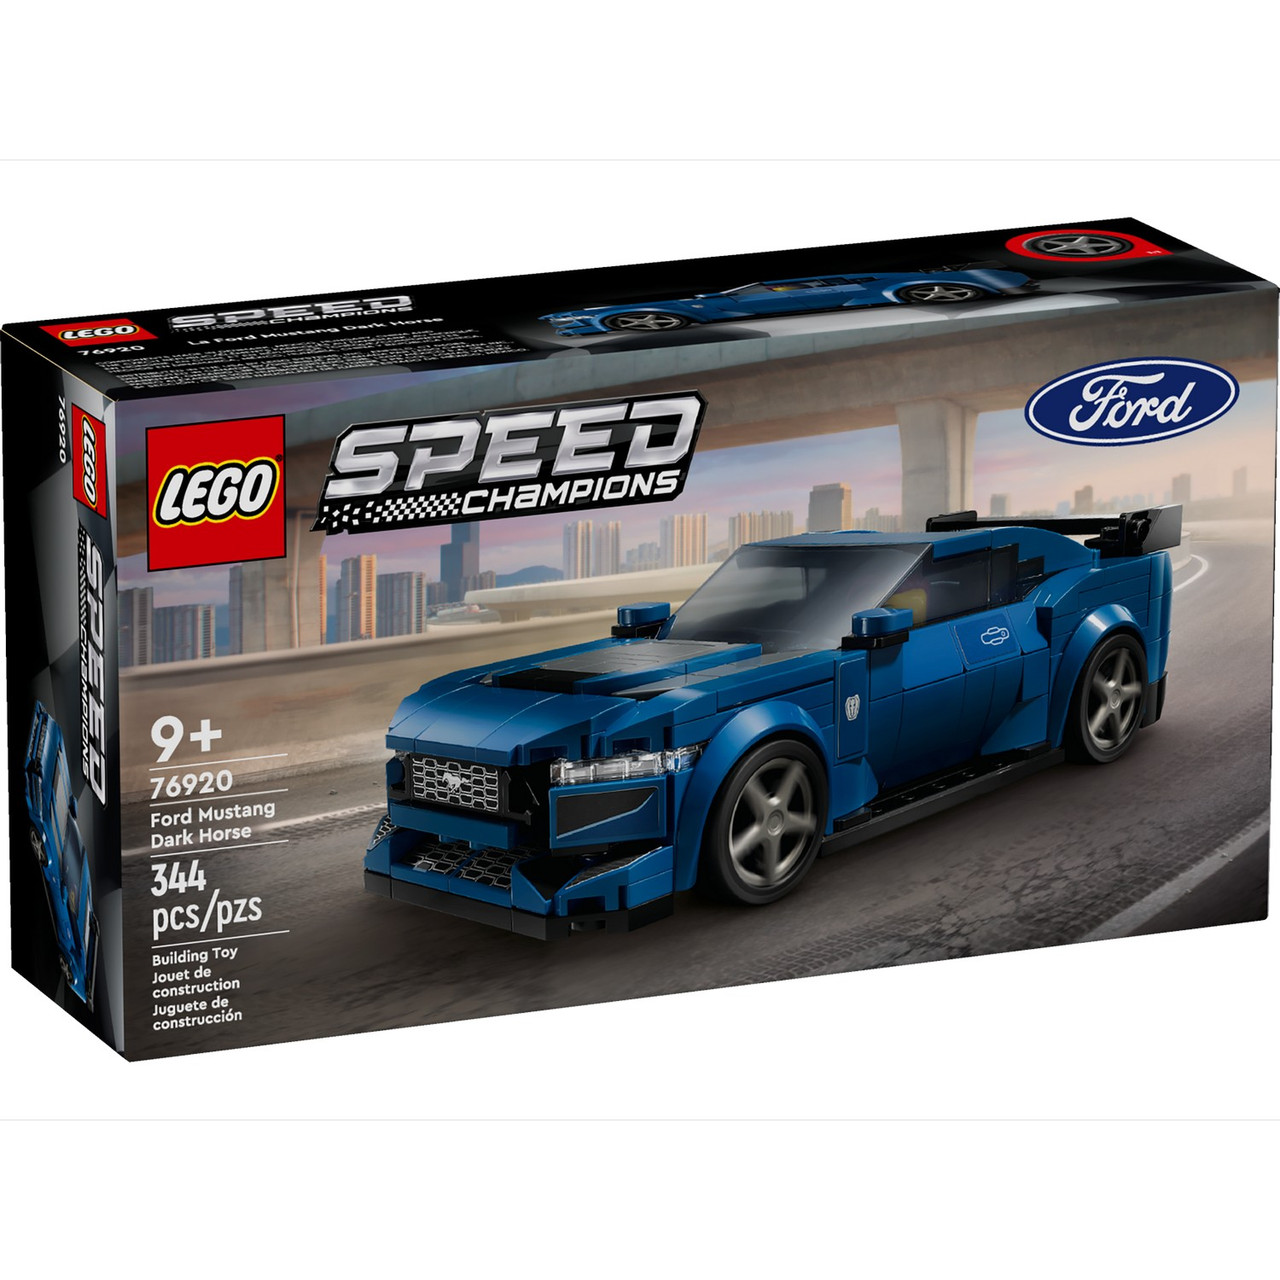 Lego 76920 Speed Champions Ford Mustang Dark Horse